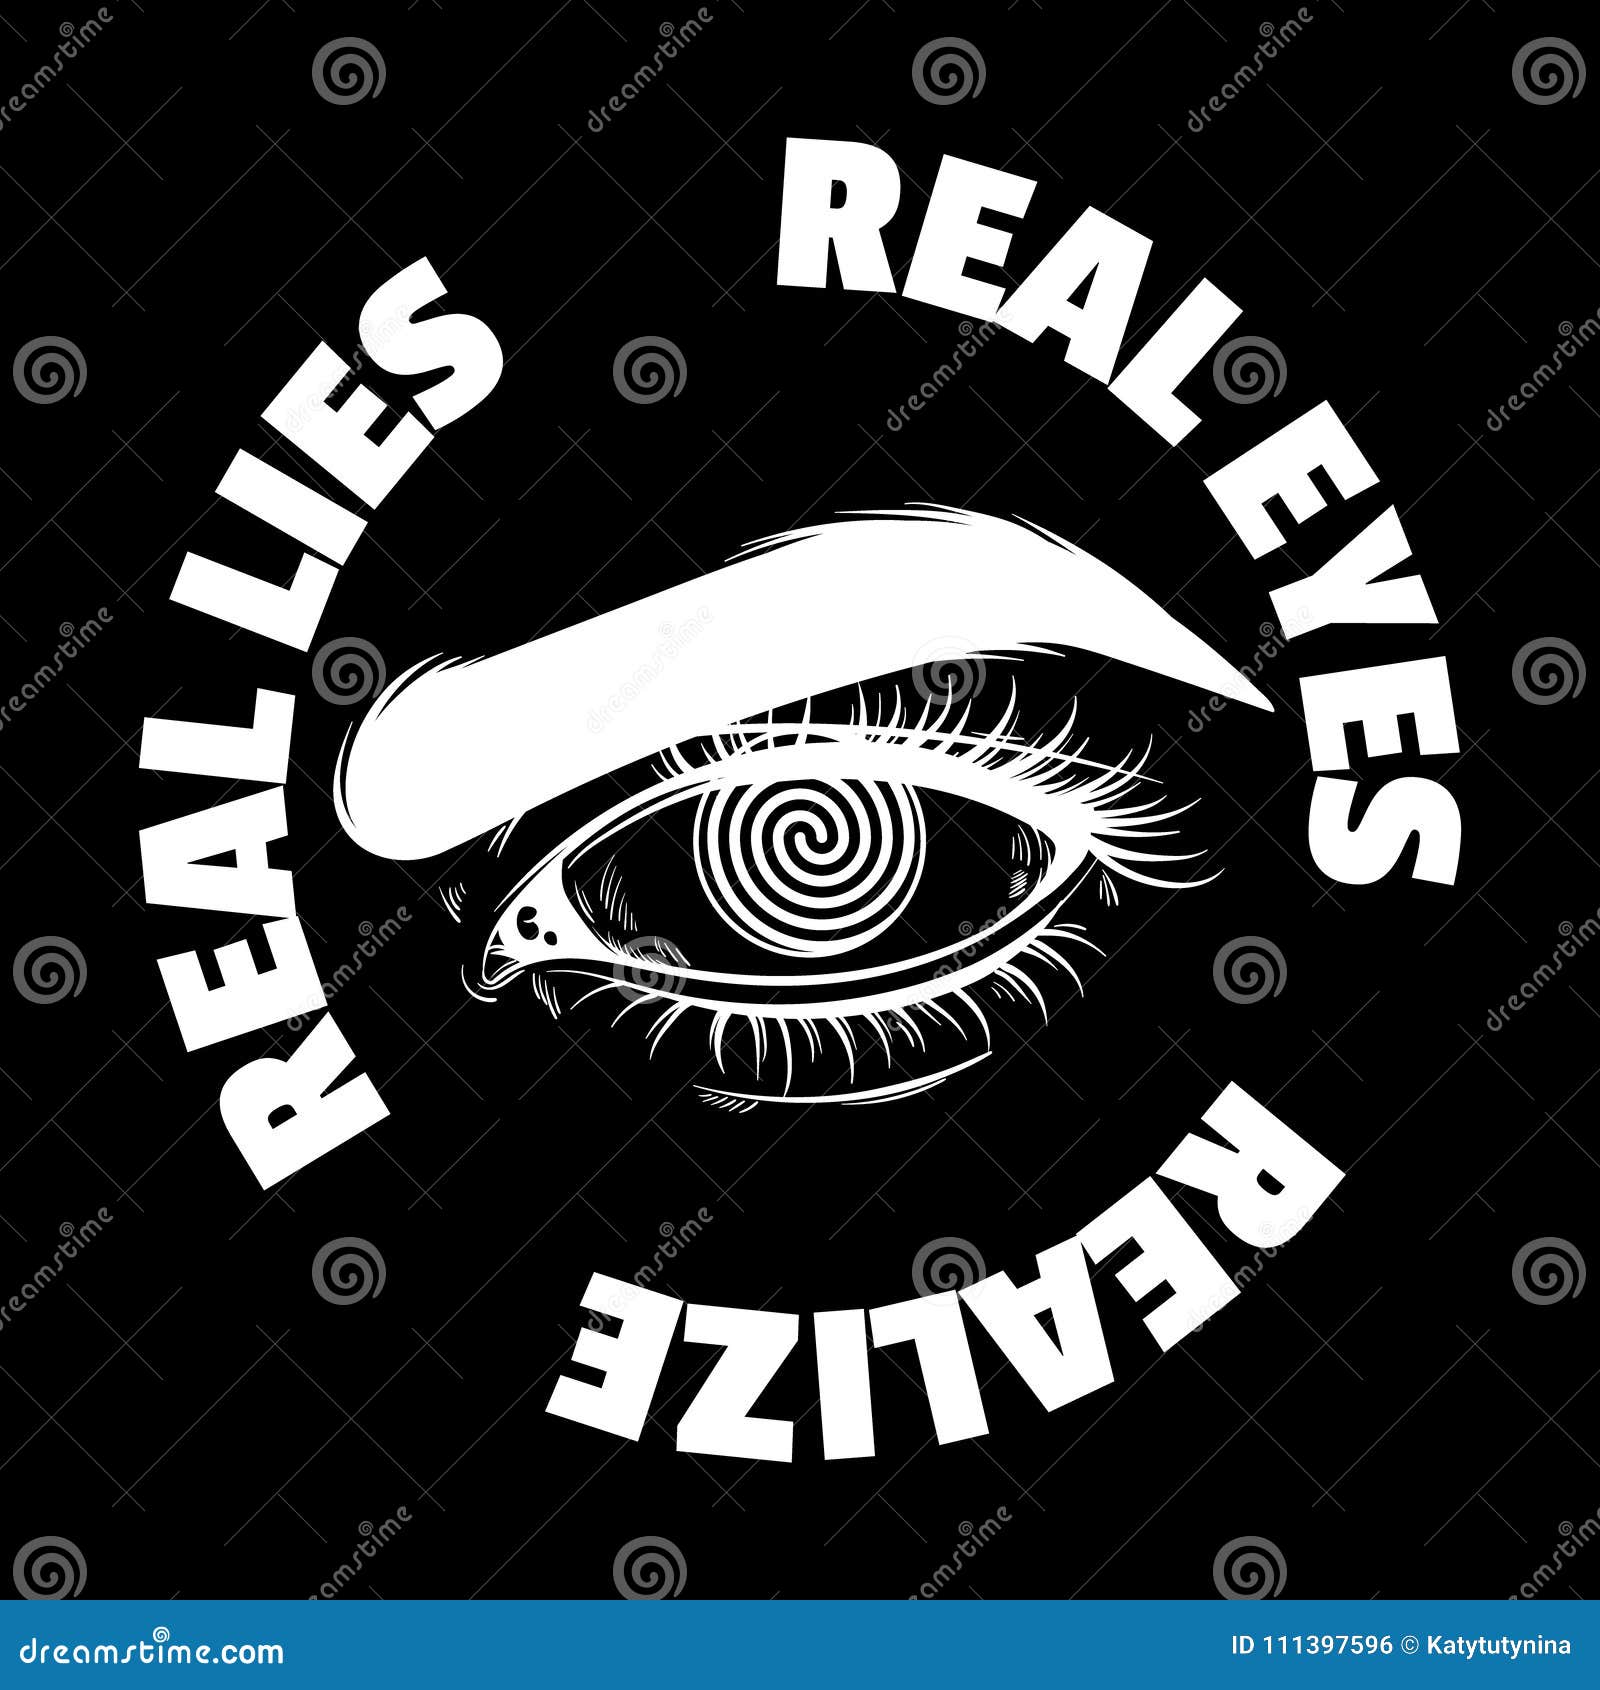 real eyes realize real lies.  typography slogan